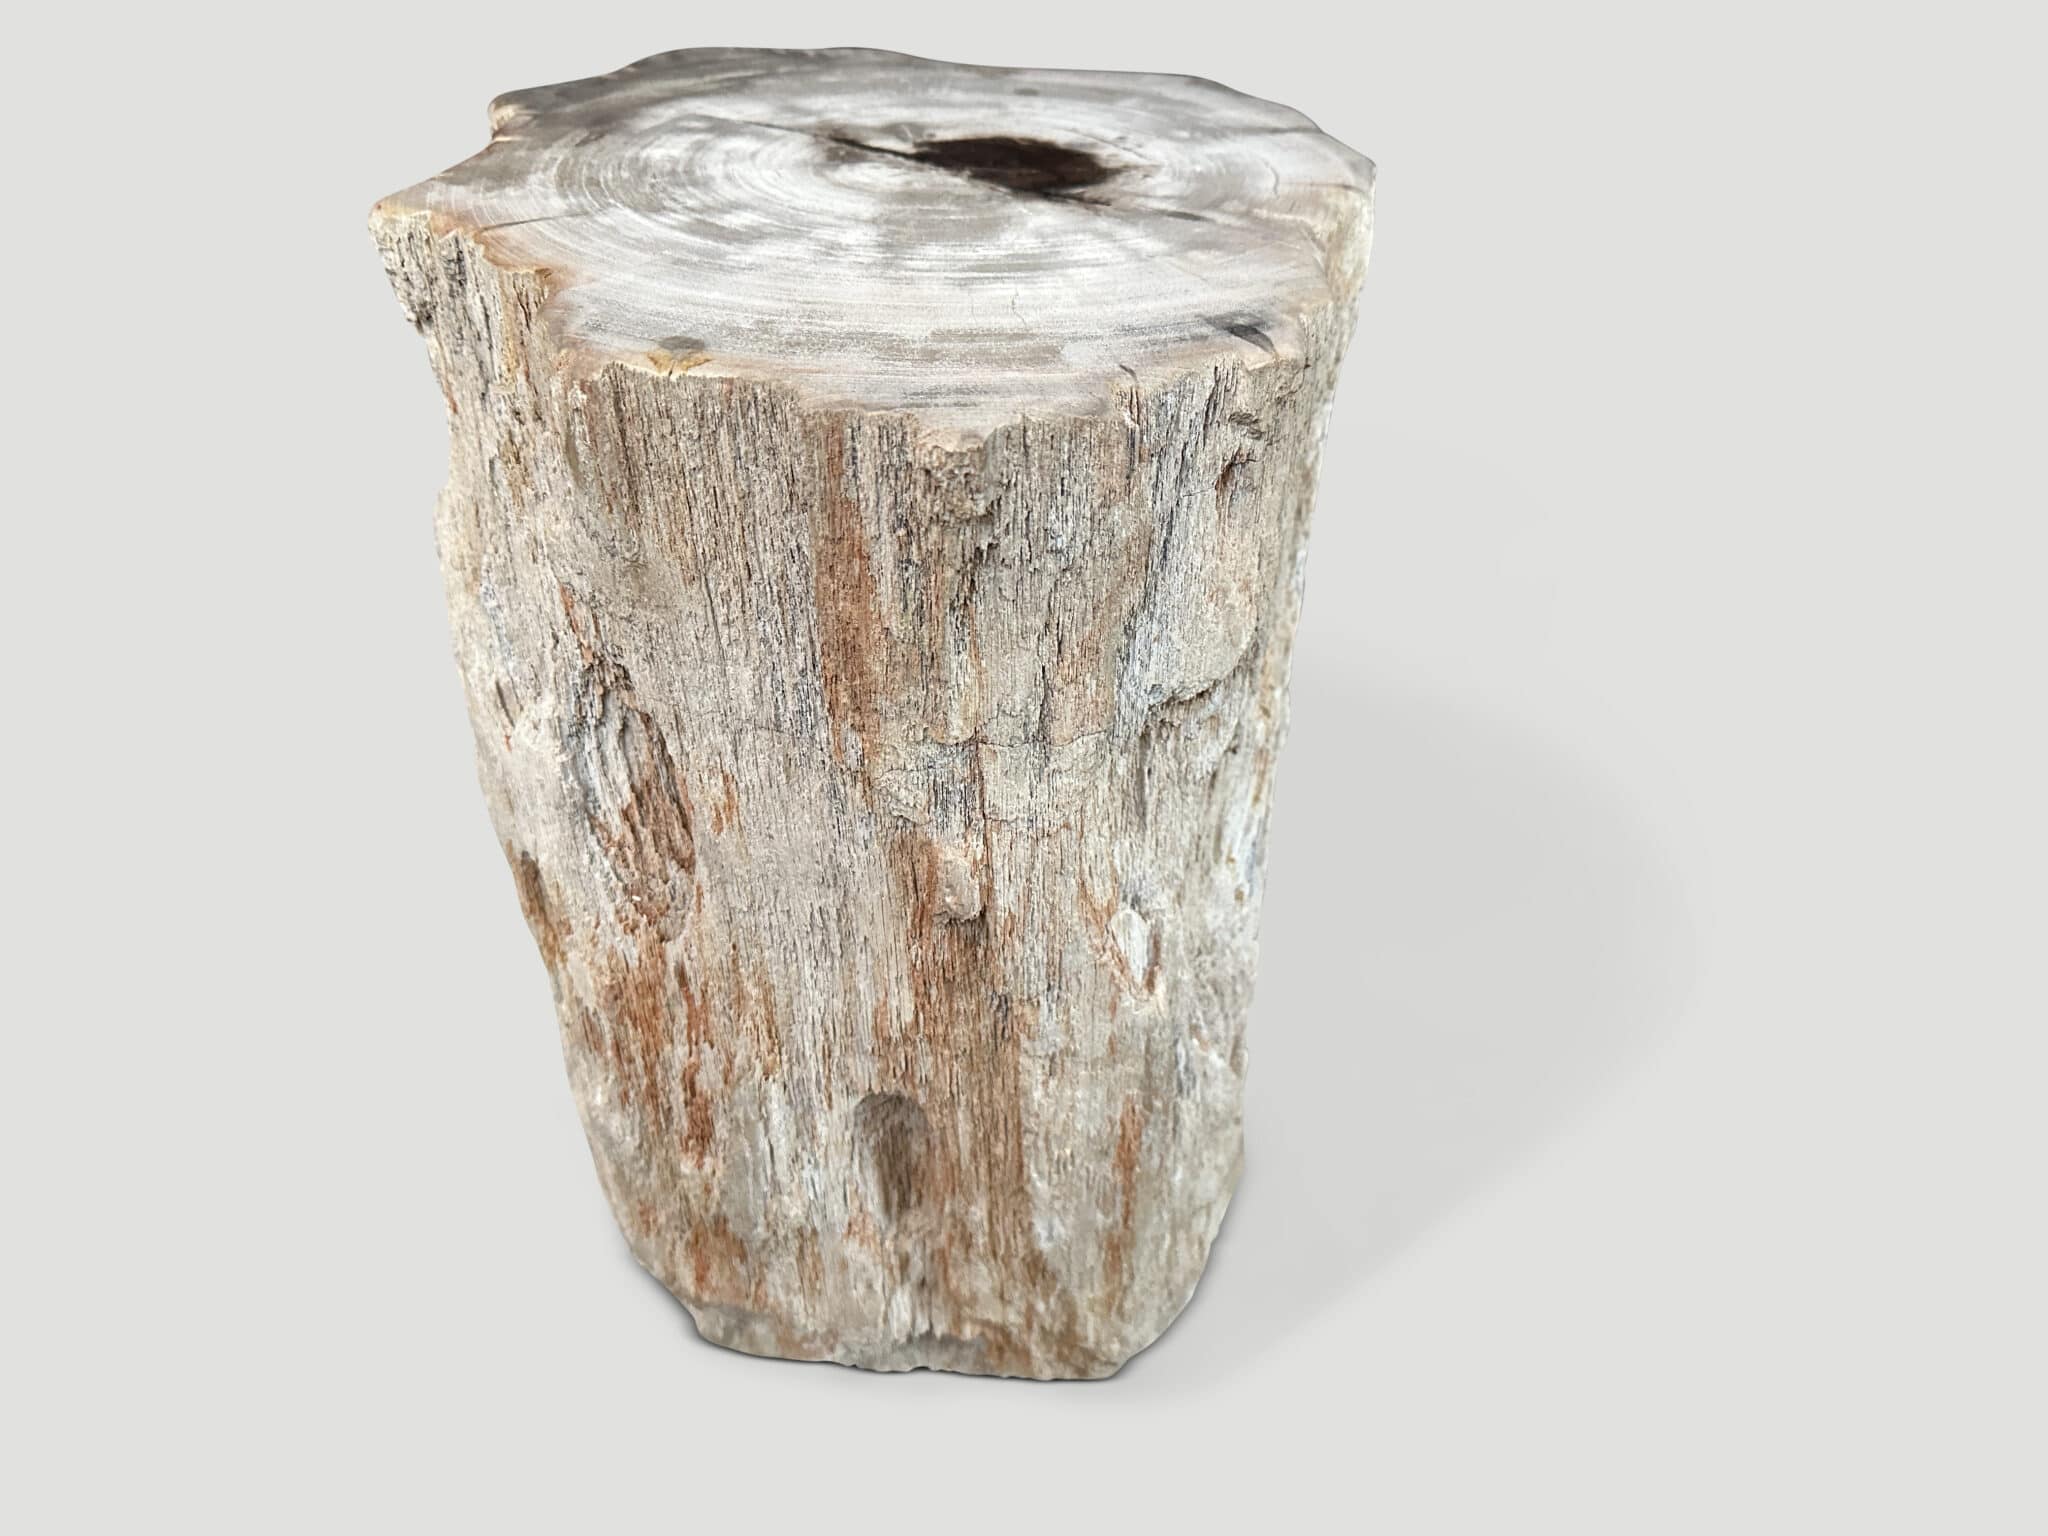 HIGH QUALITY PETRIFIED WOOD AND RESIN SIDE TABLE